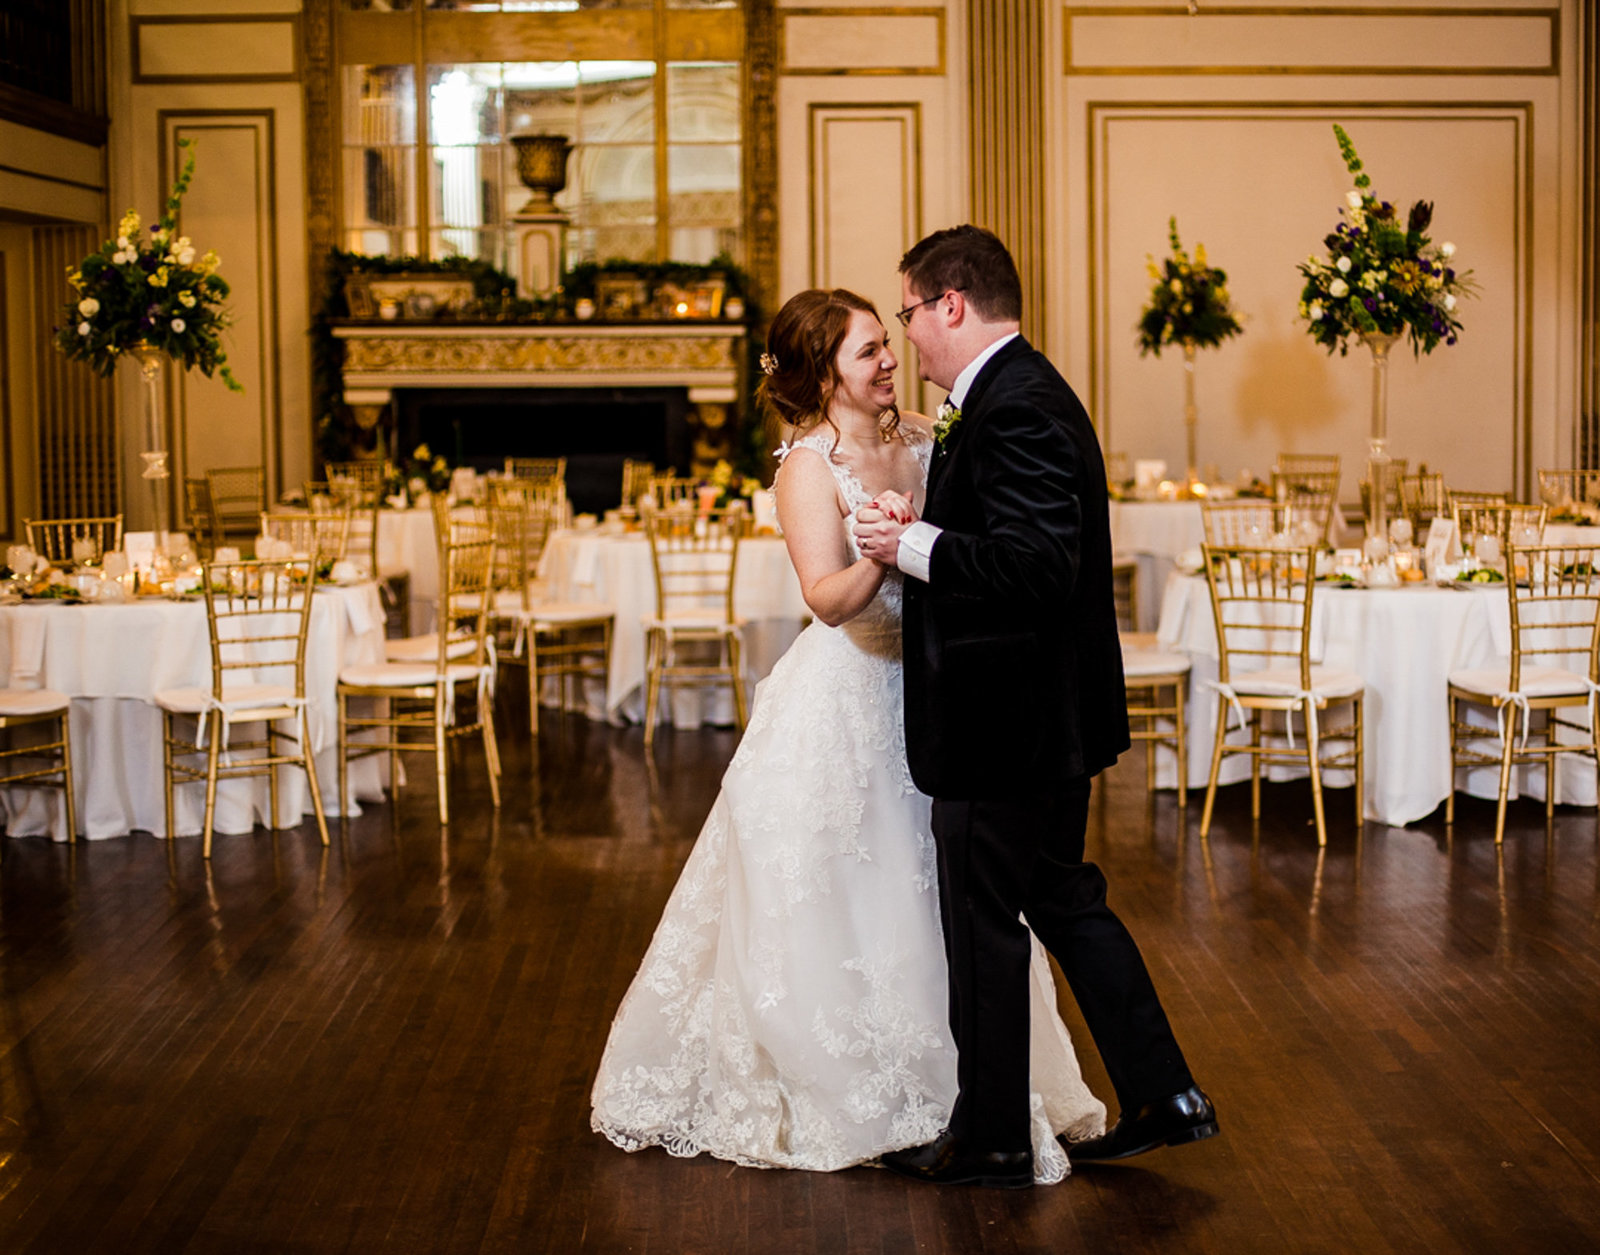 Bride and groom practice forst dance at the George Washington Hotel's Grand Ballroom